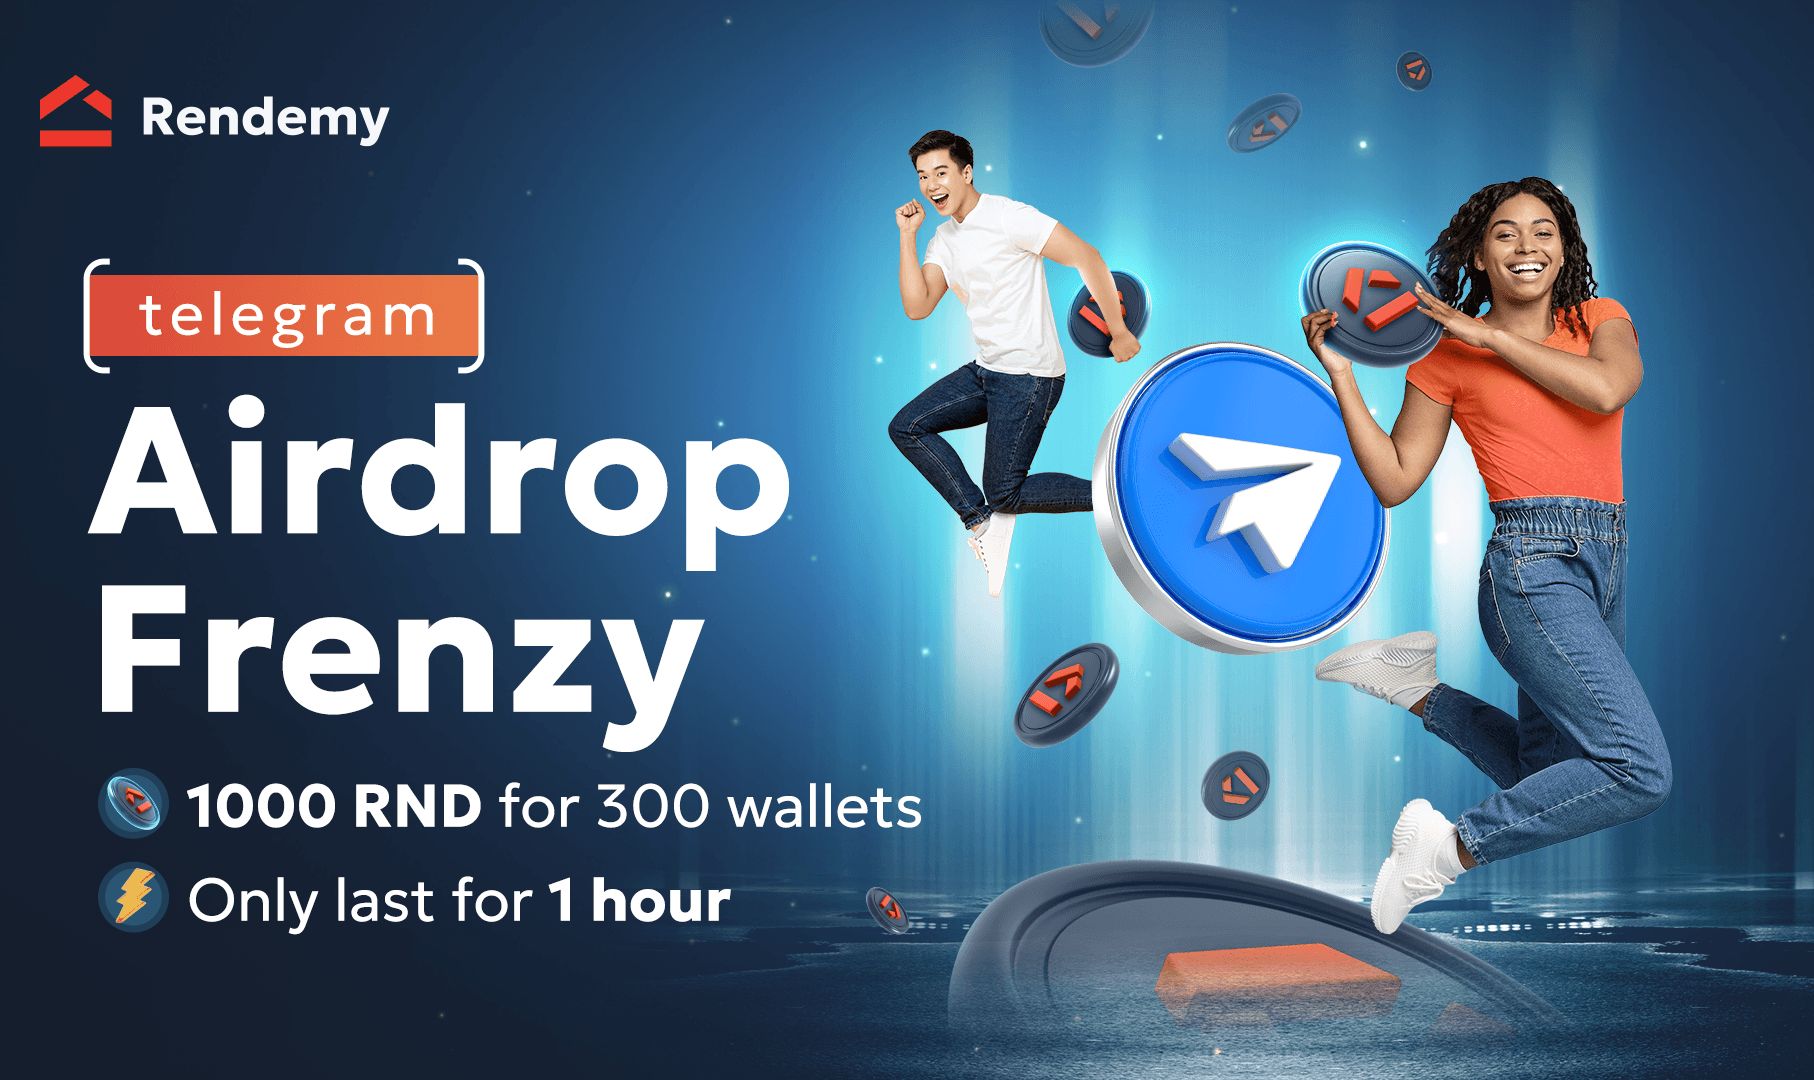 rendemy_airdrop_frenzy_coverblog_1706496305465.png